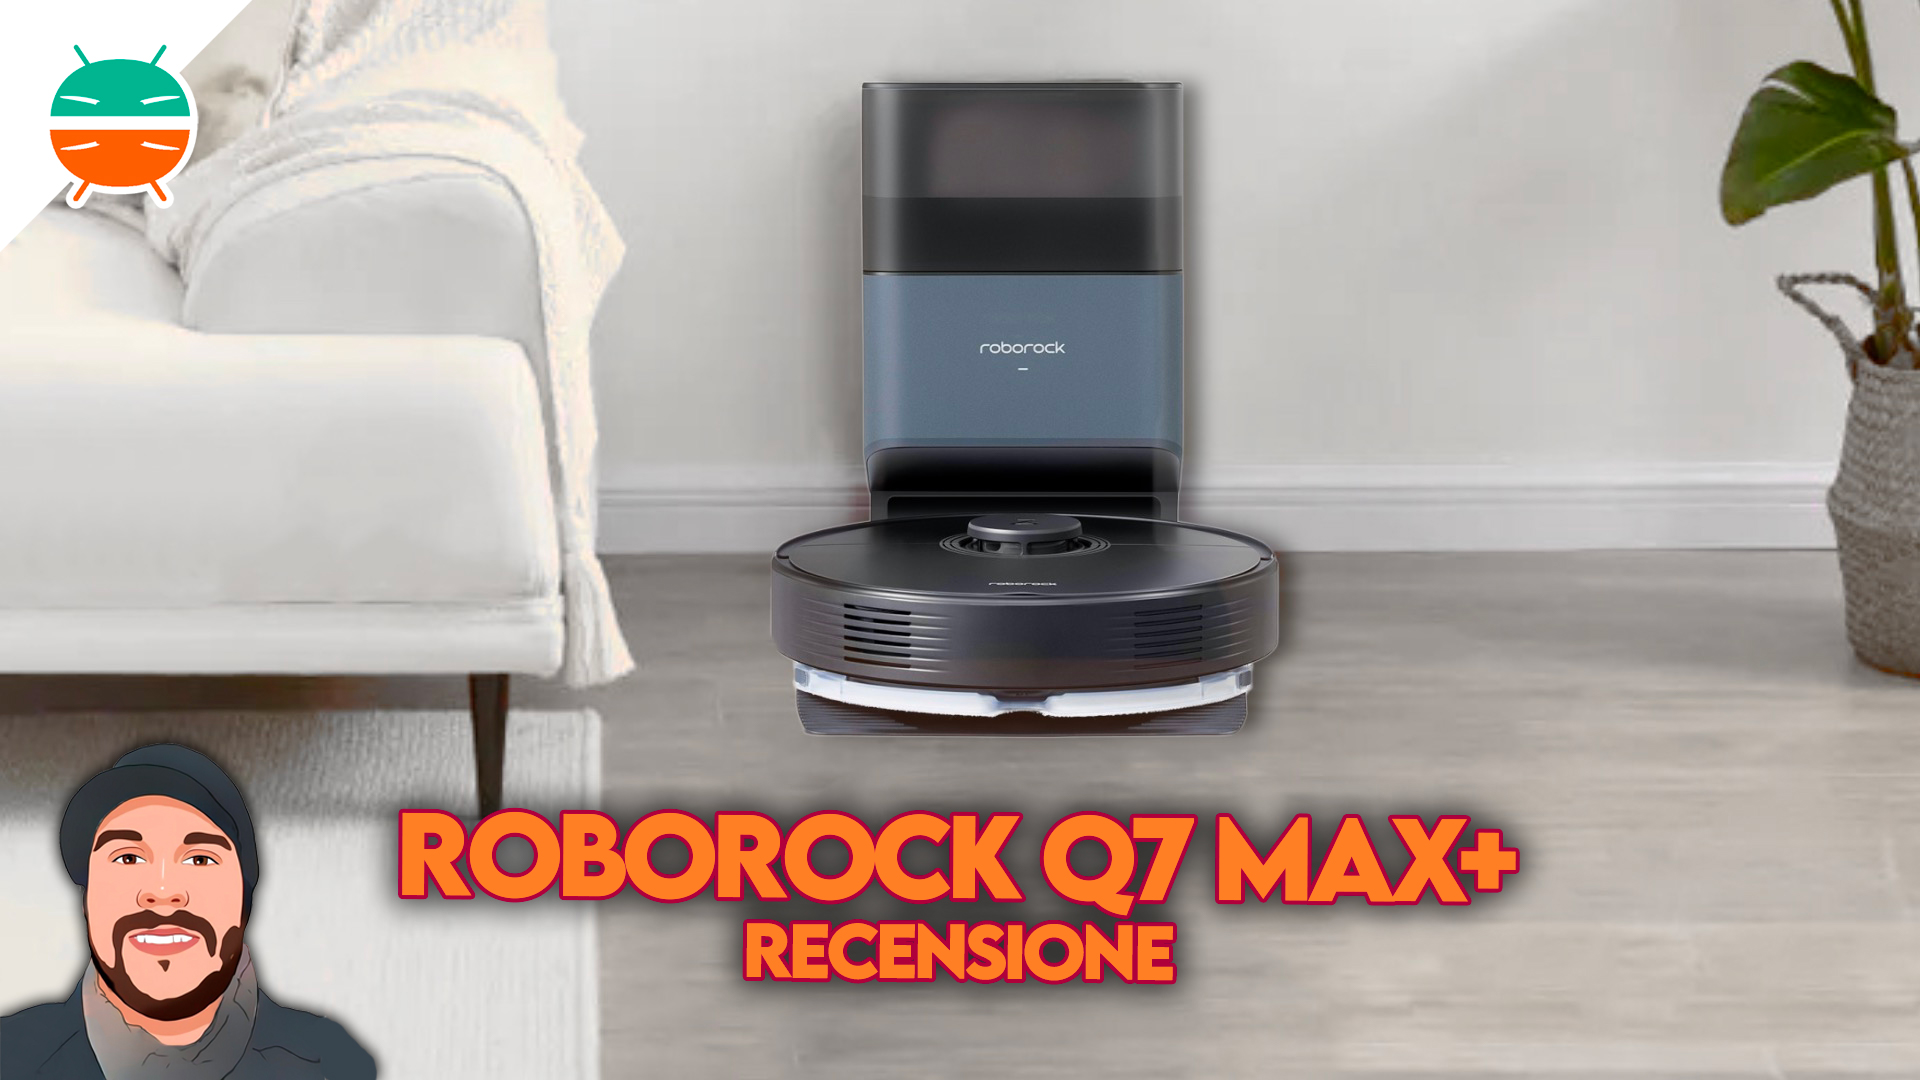 Roborock Q7 Max + review, the powerful vacuum cleaner that washes